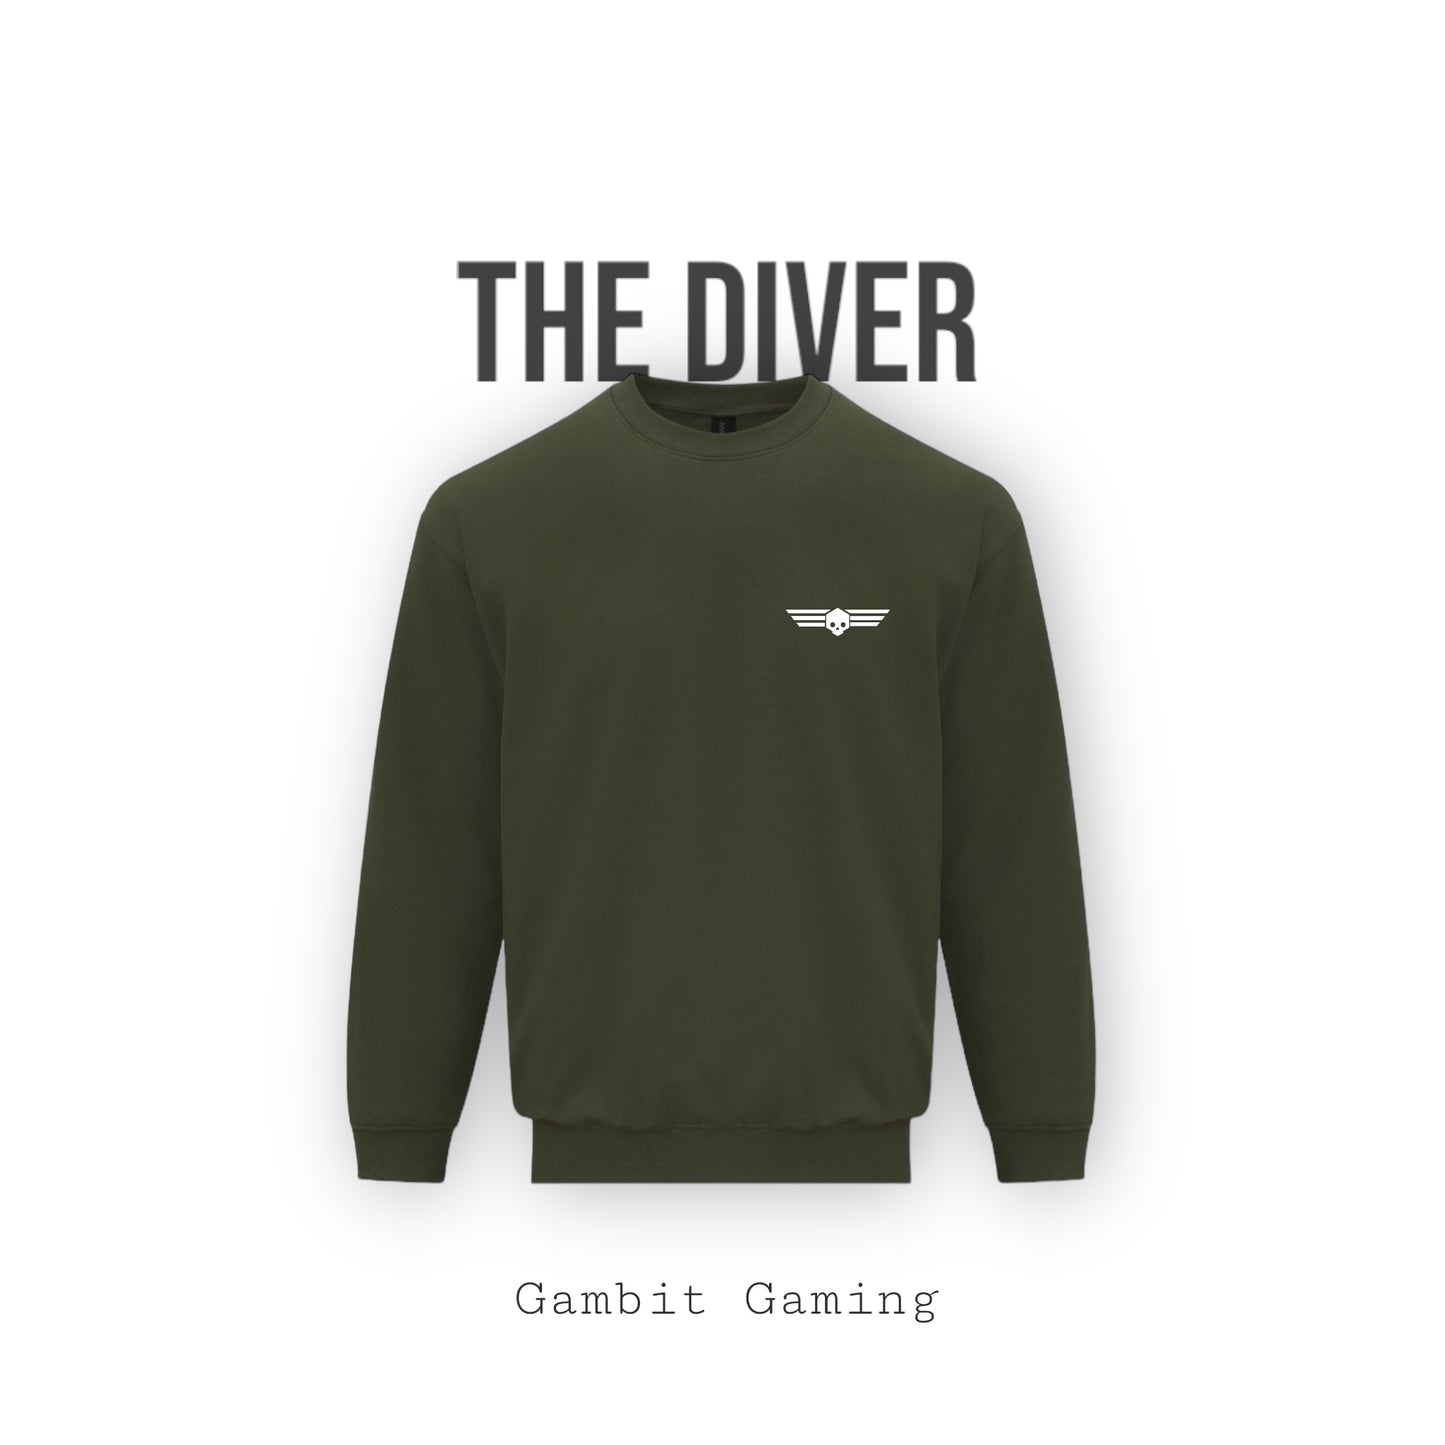 The Diver Sweater